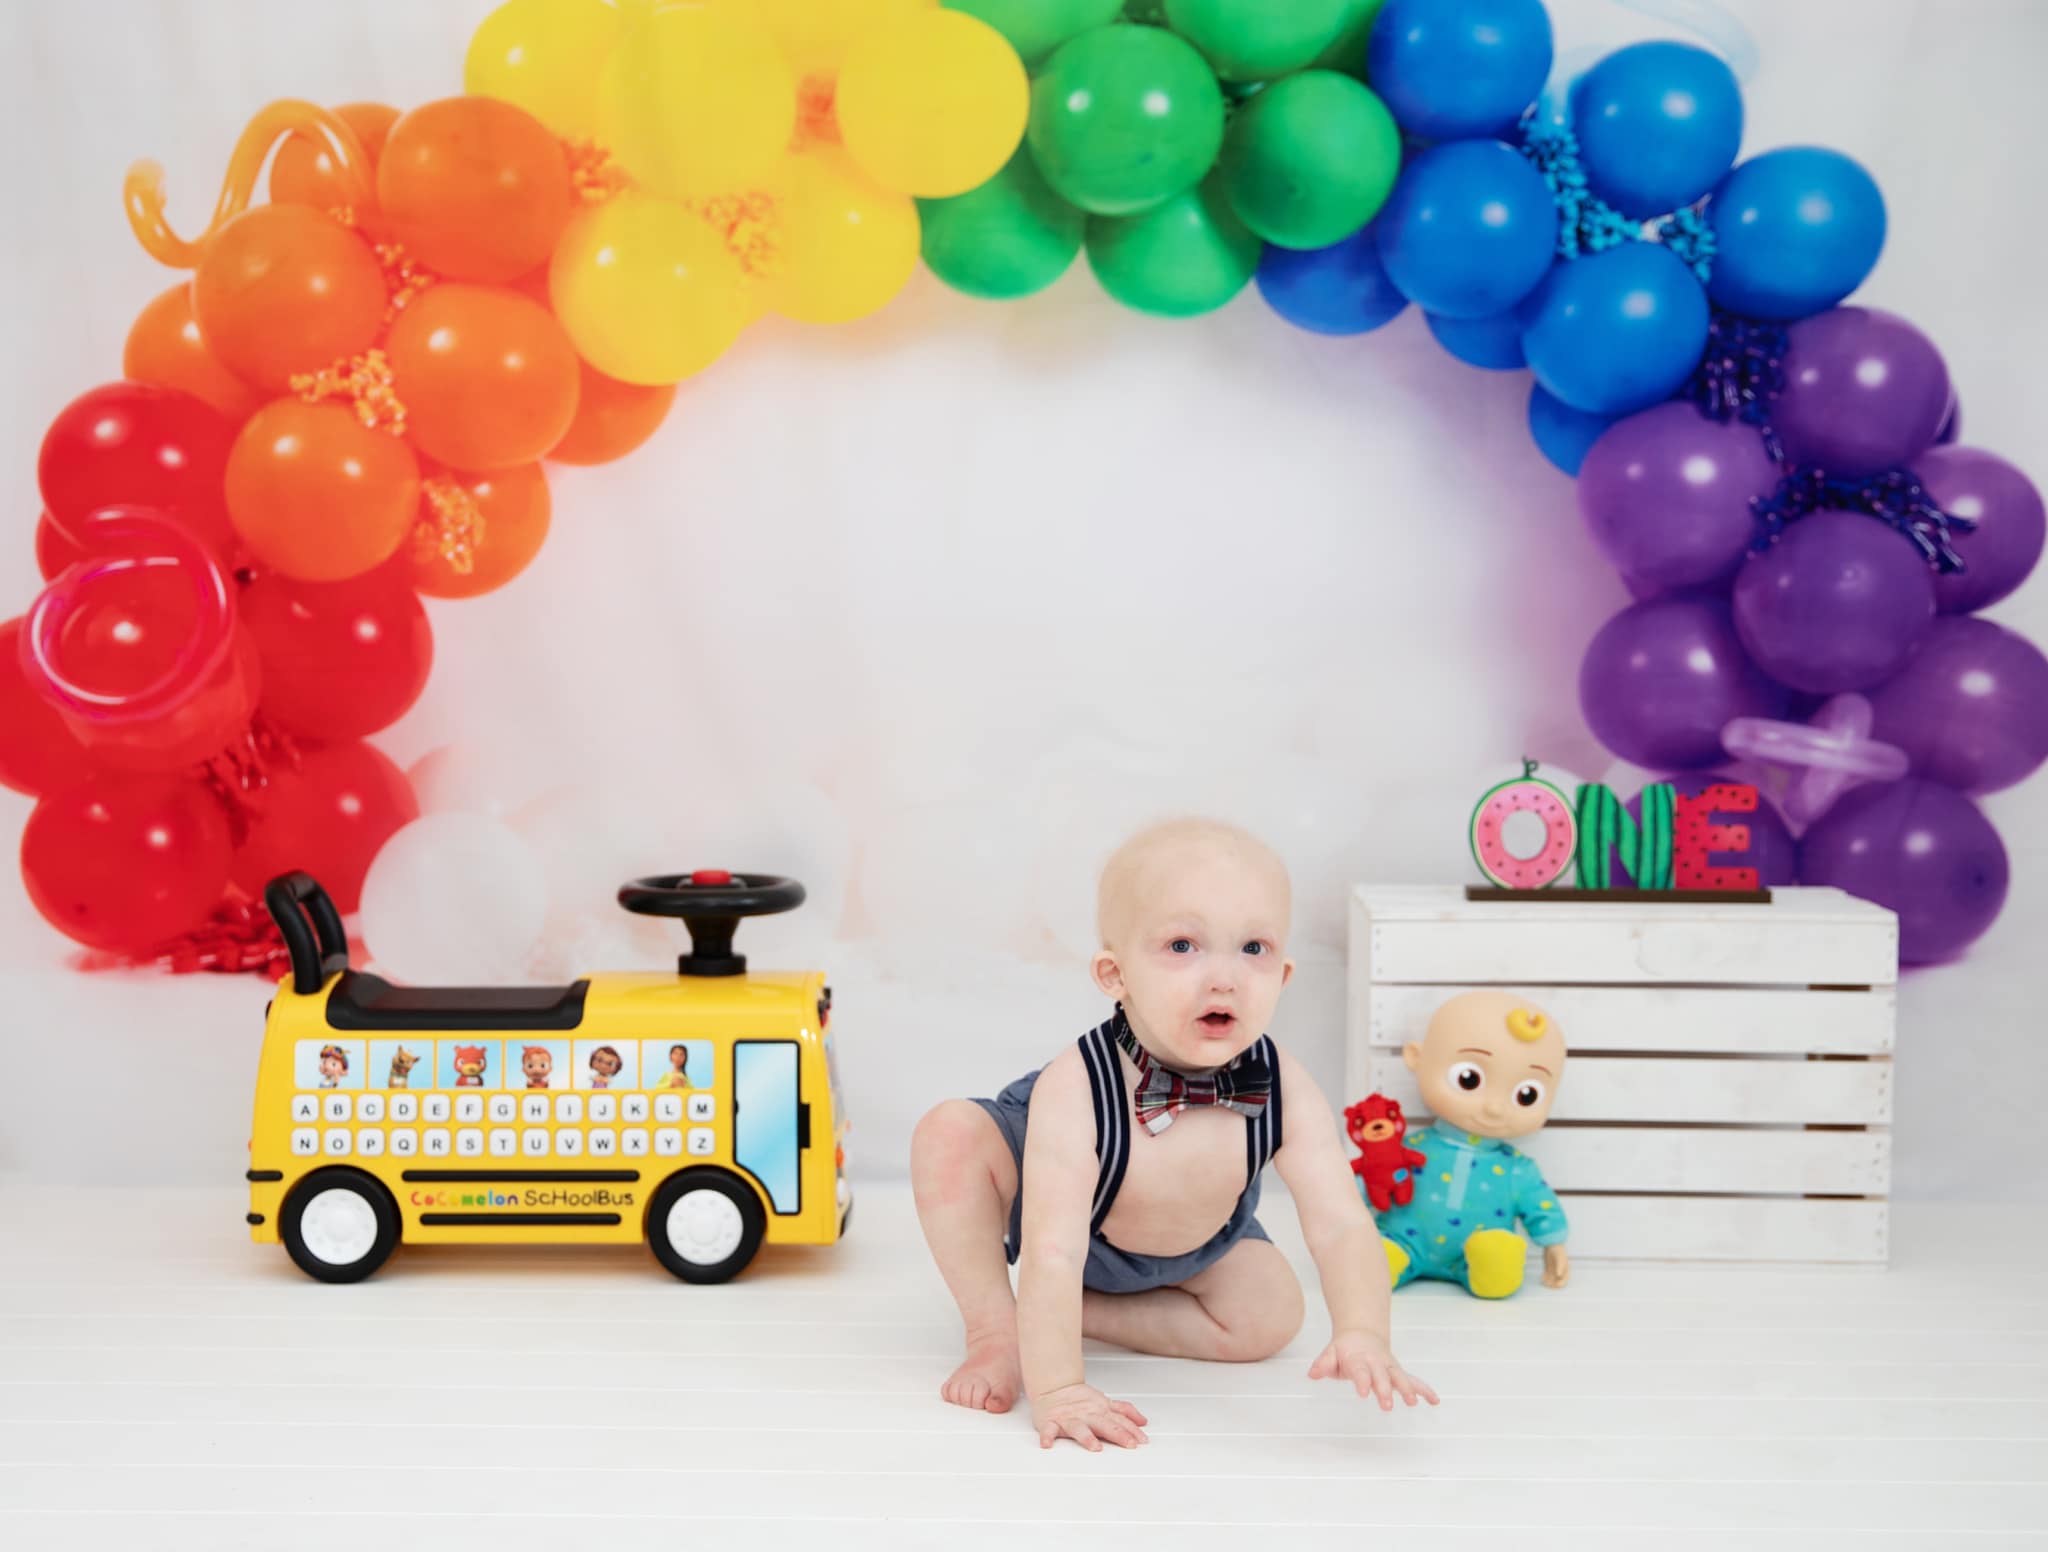 RTS Kate Rainbow Balloon Arch Backdrop Designed by Chrissie Green